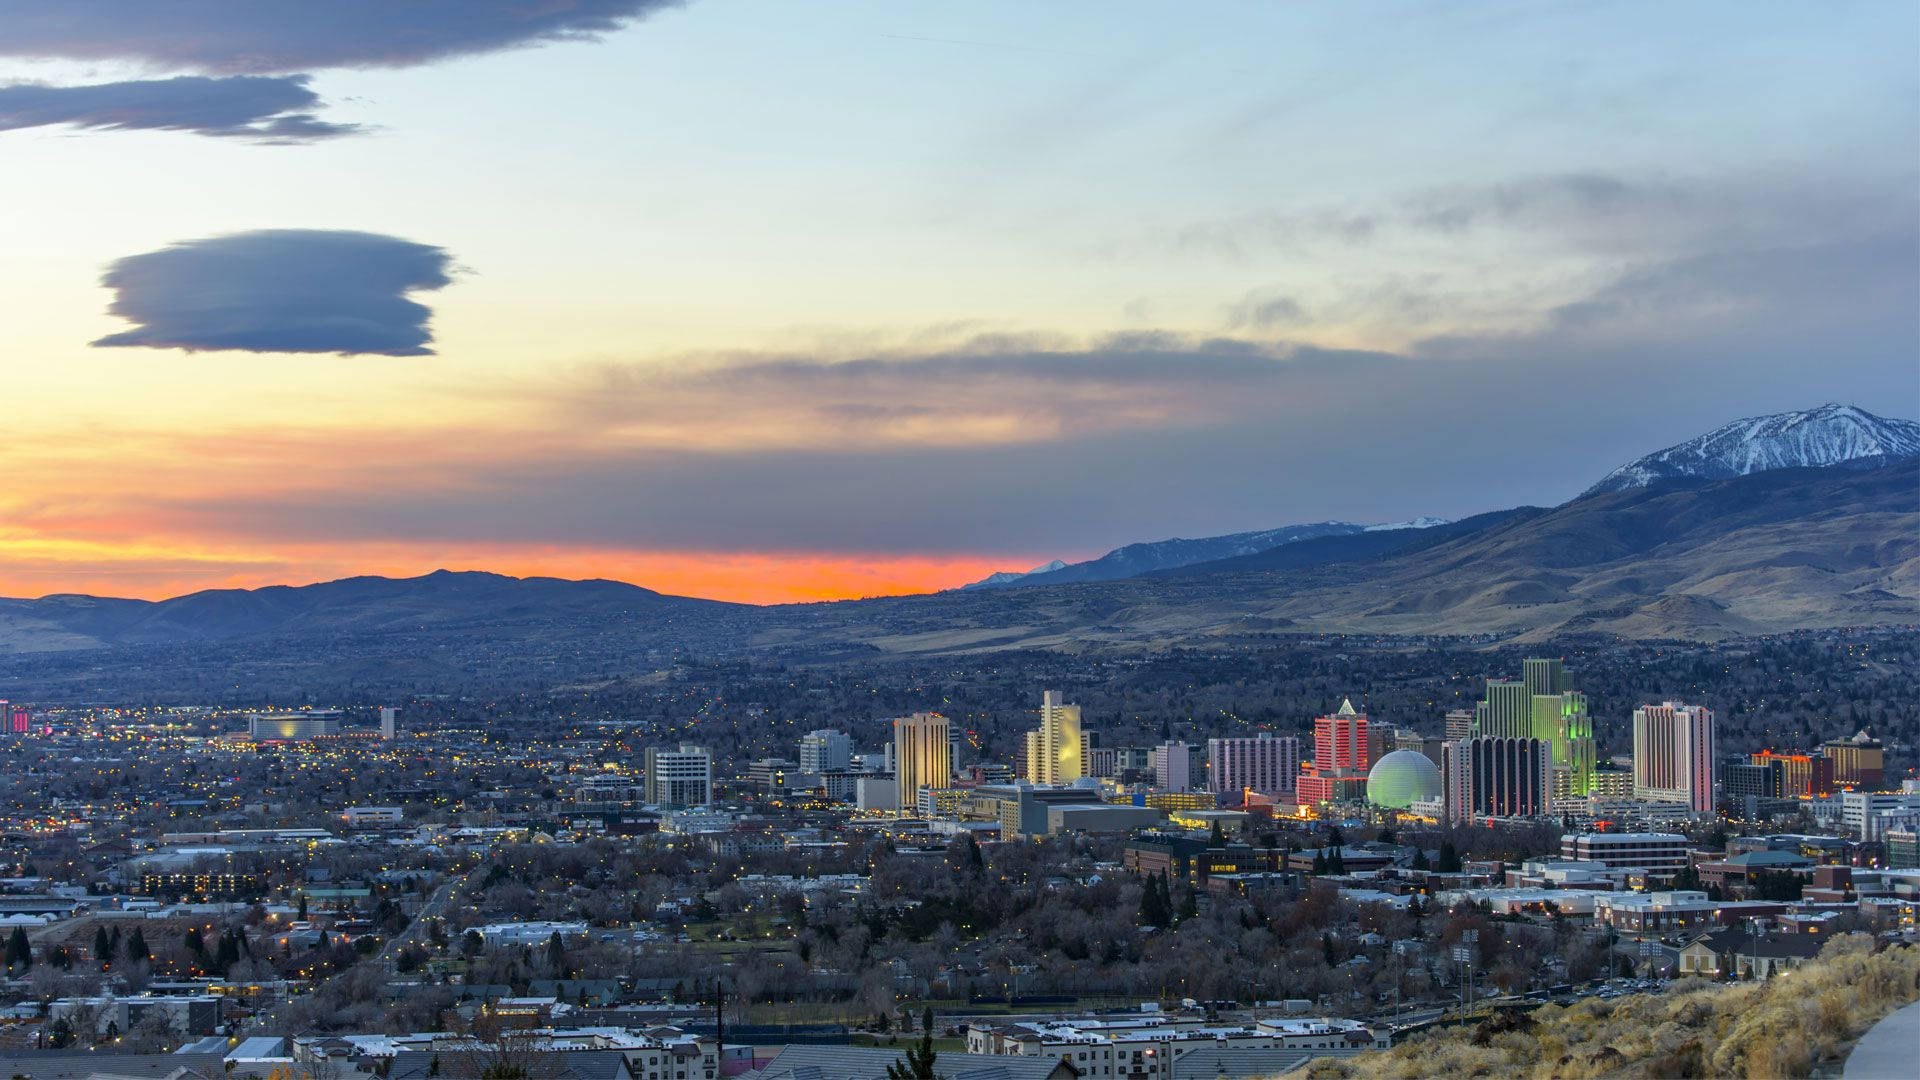 The stunning view of Reno's skyline at sunset. Wallpaper